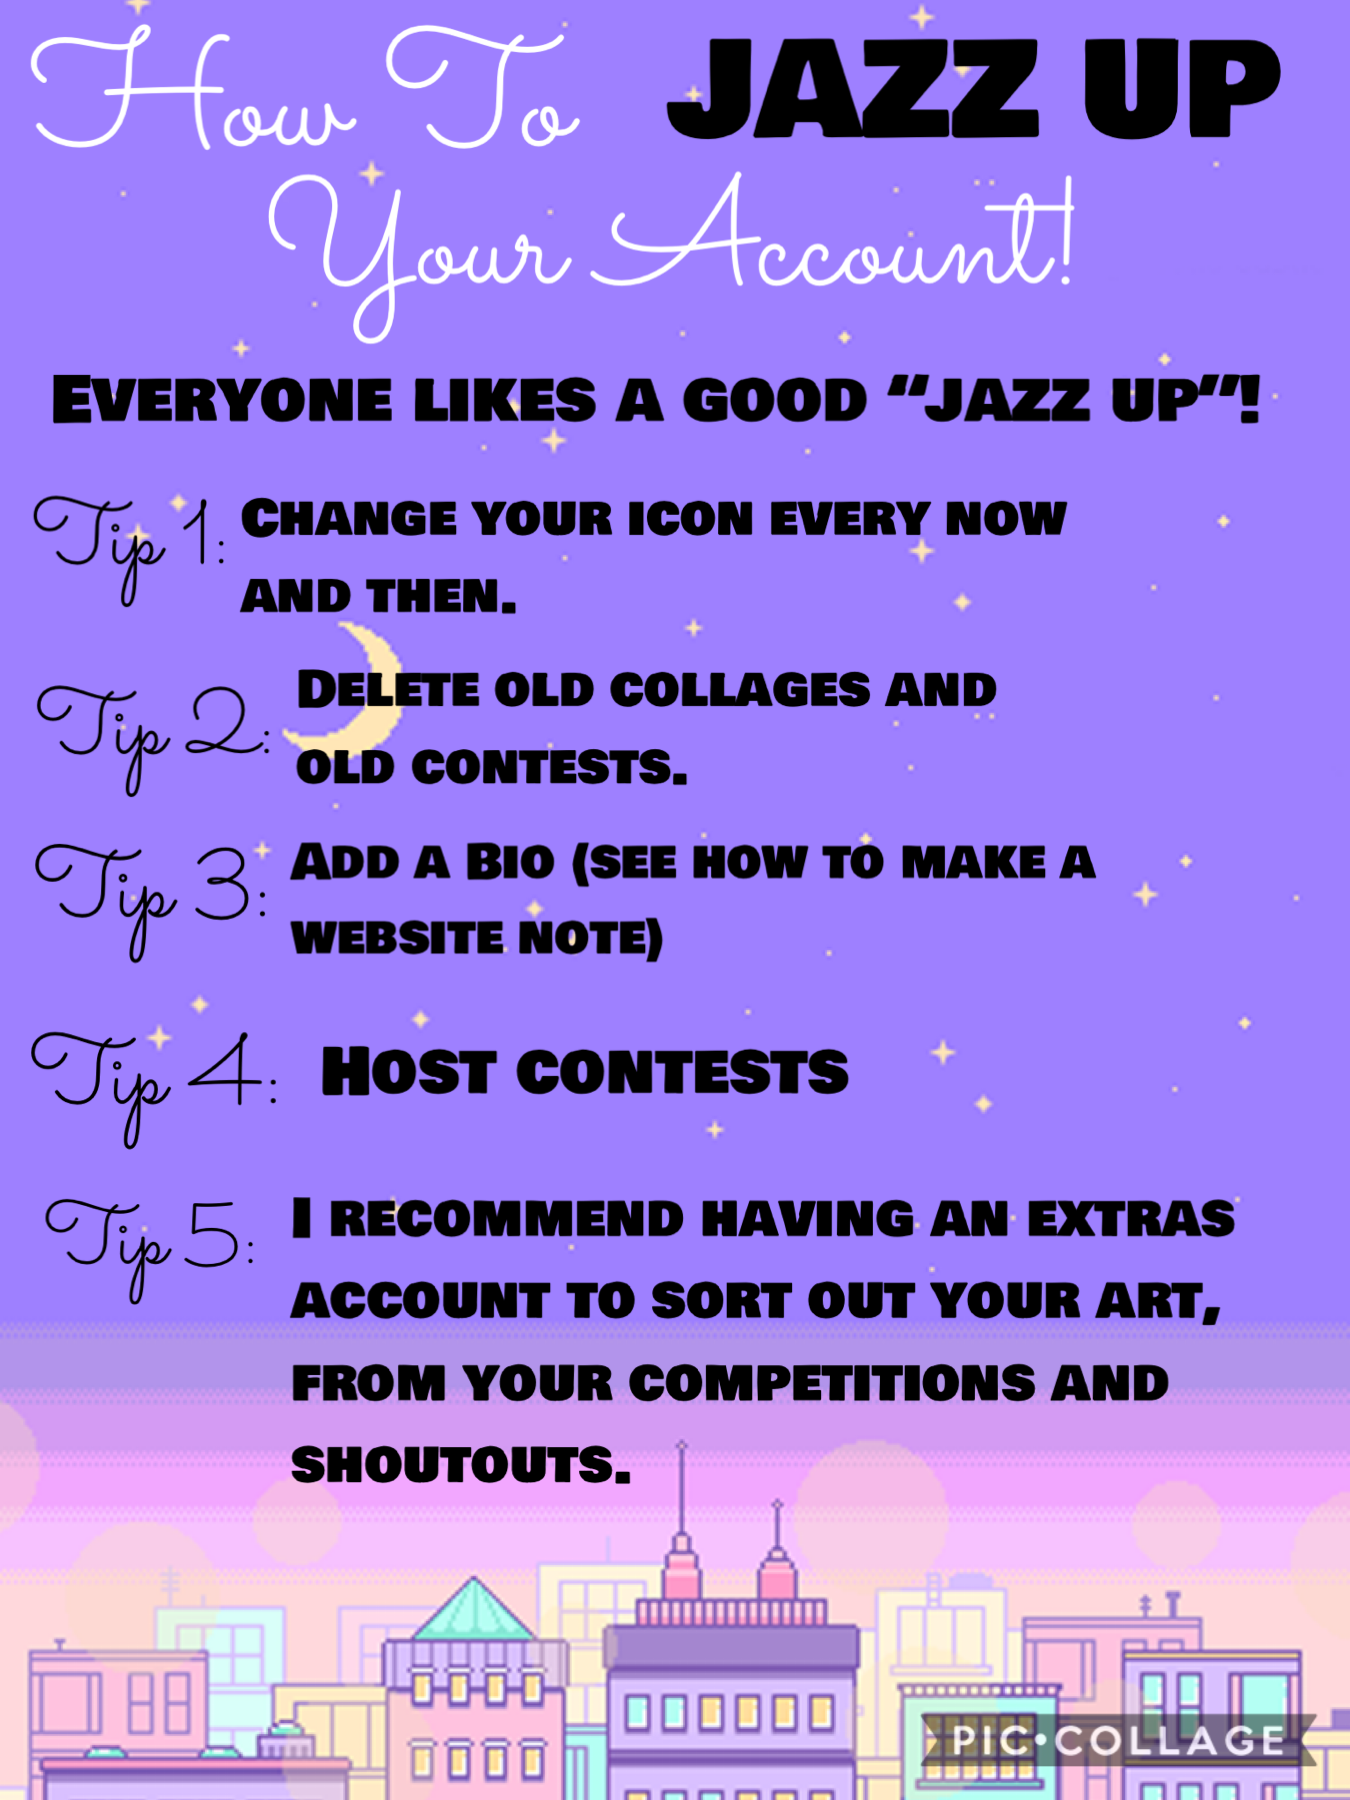 How To JAZZ UP your account!